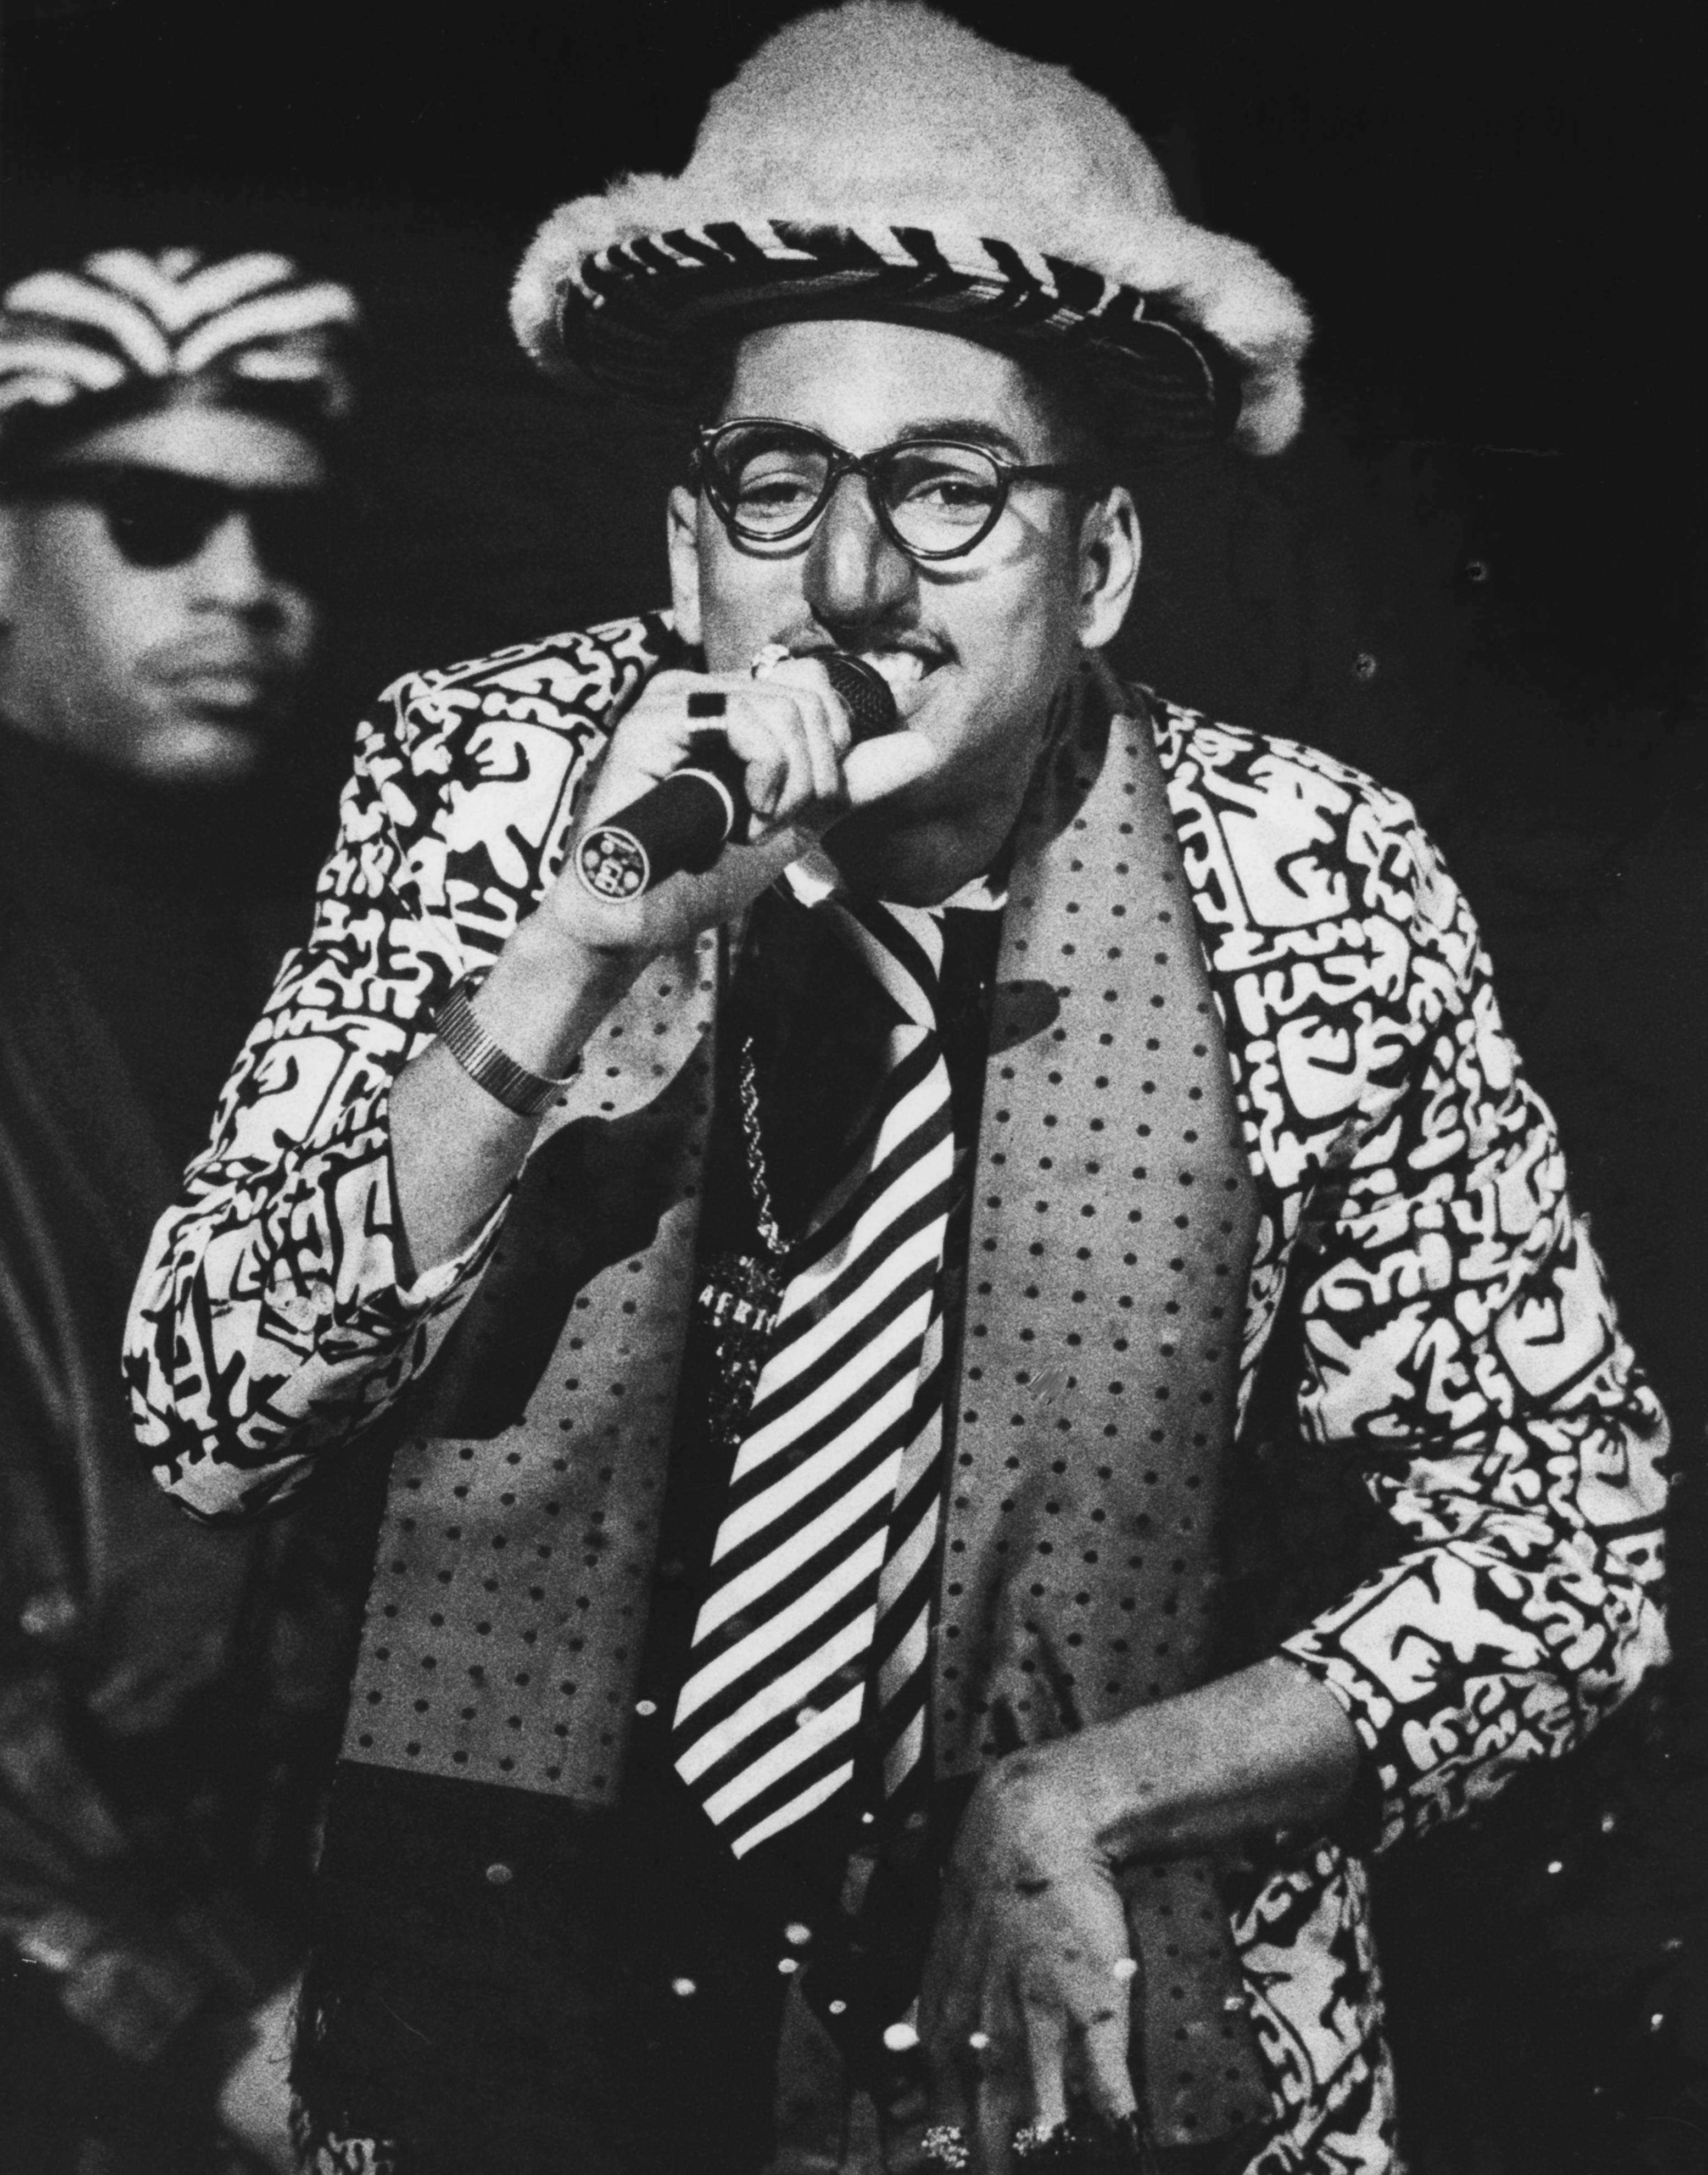 SAN FRANCISCO, CALIFORNIA - MARCH 17: Digital Underground's Humpty Hump (aka Shock G) performs at the Bay Area Music Awards on March 17, 1990 at the San Francisco Civic Auditorium. (Photo by Matthew J. Lee/MediaNews Group/Oakland Tribune via Getty Images)